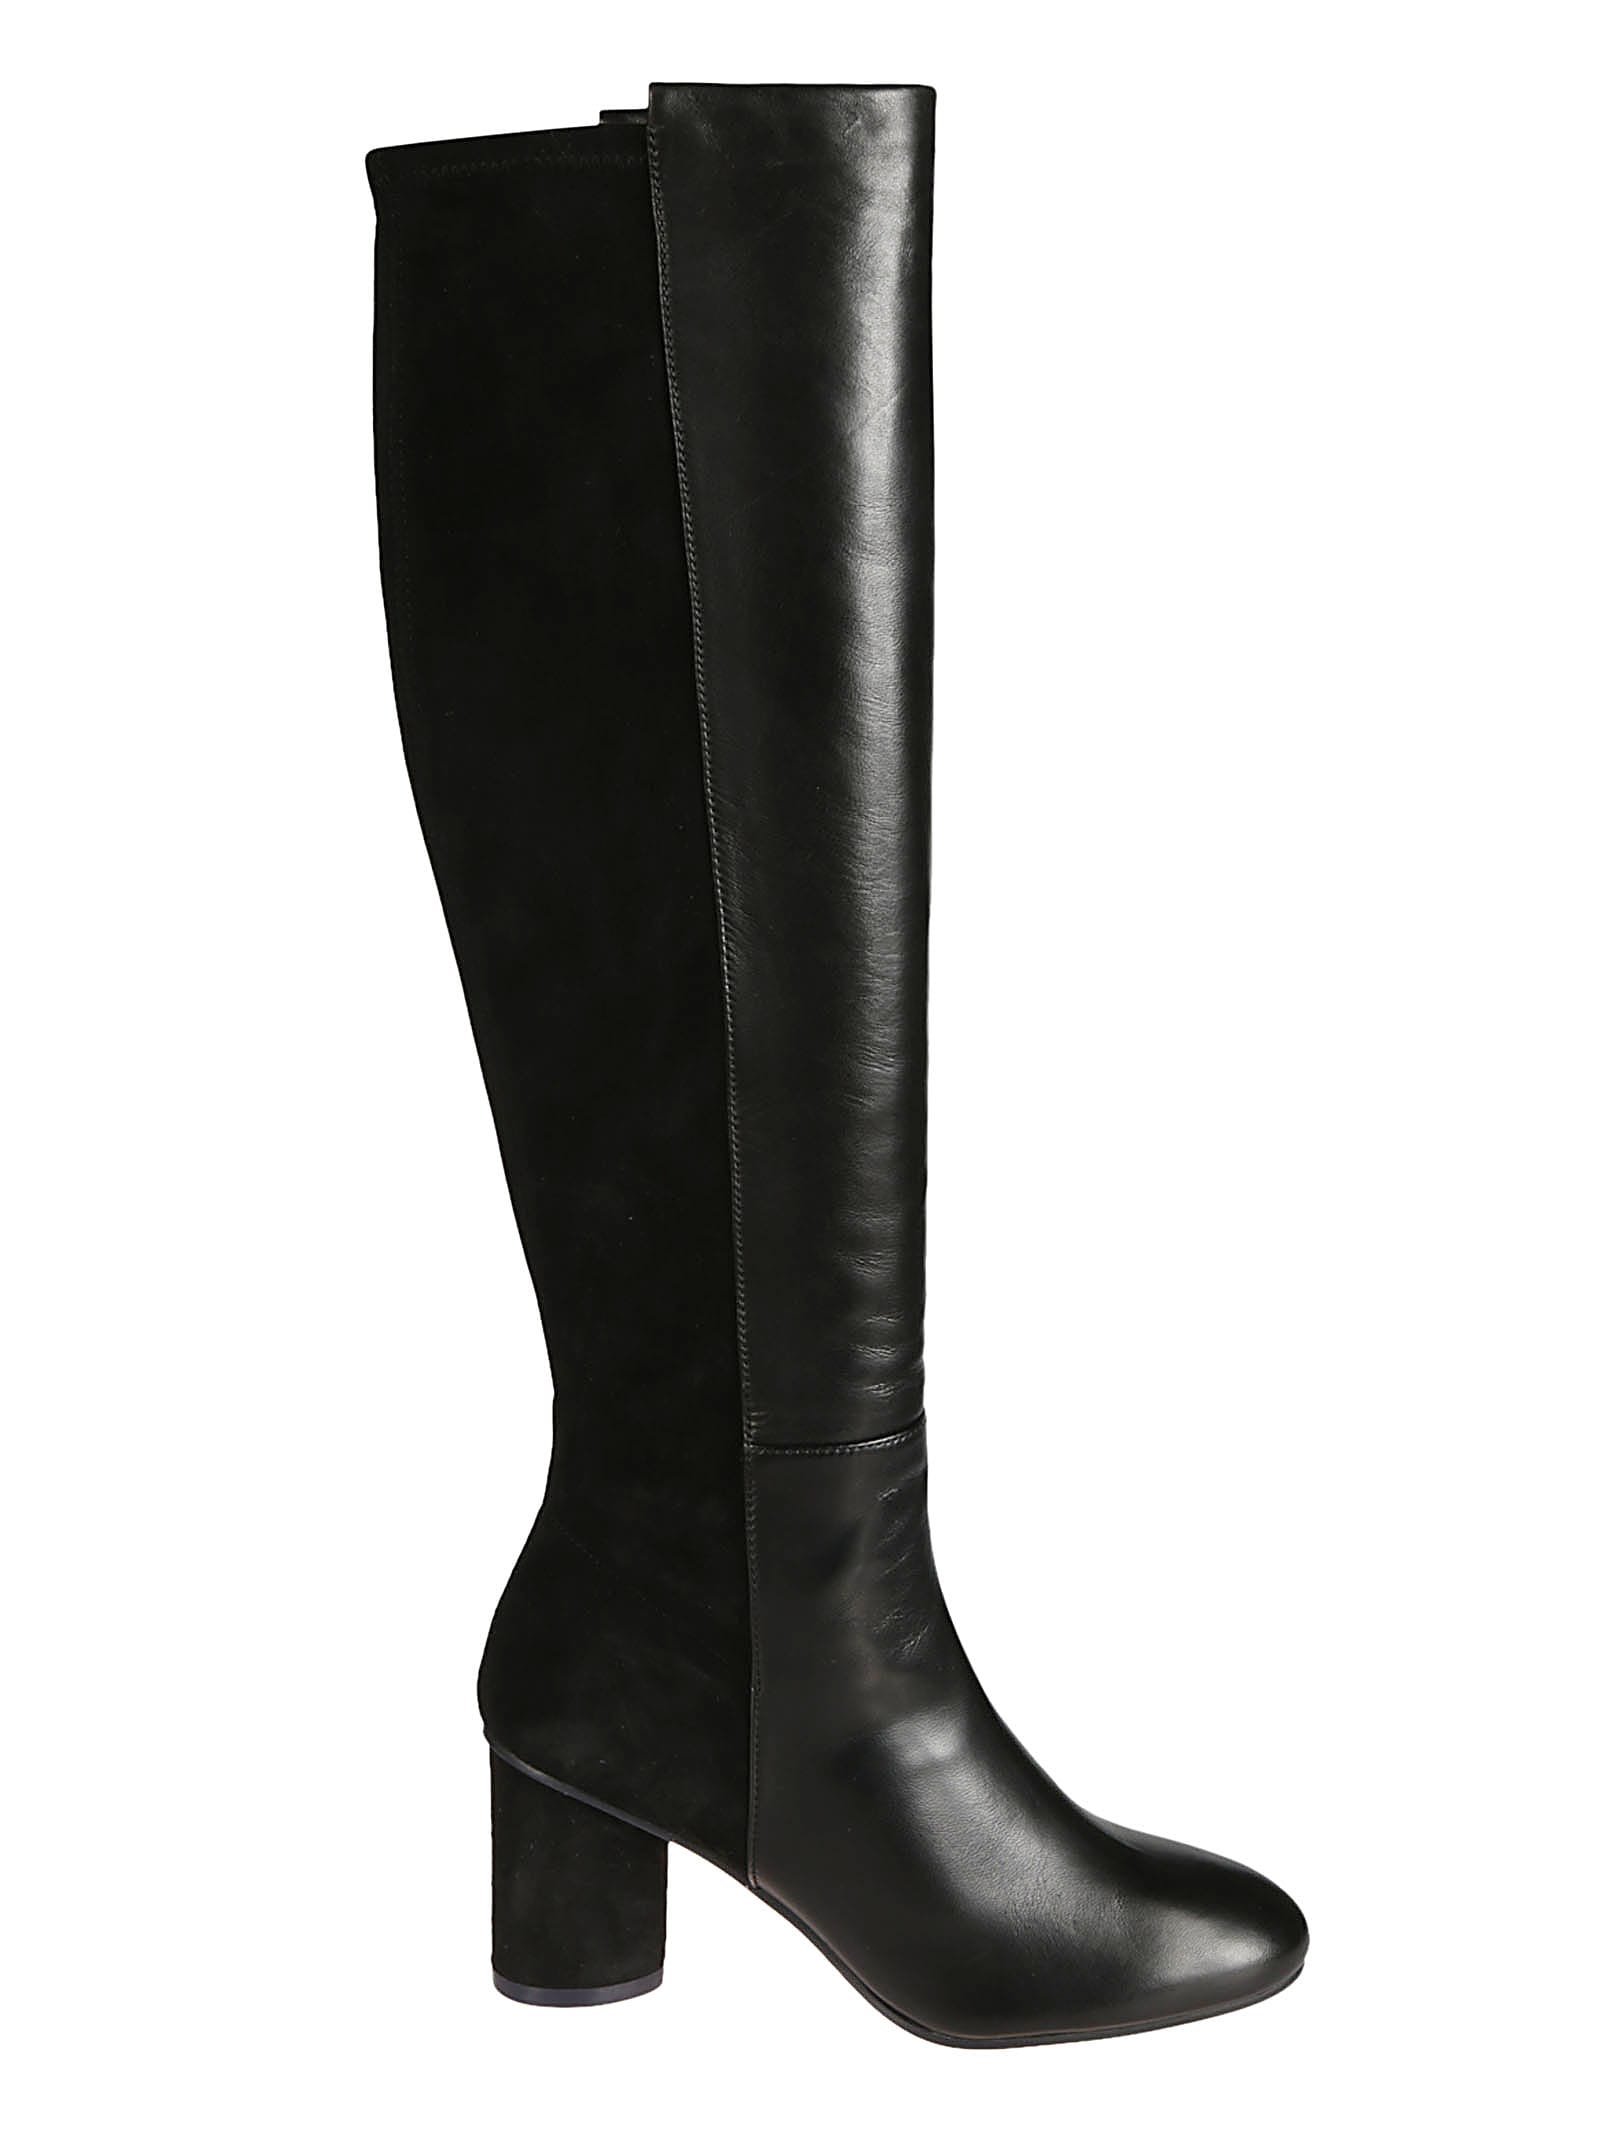 the eloise 75 boot